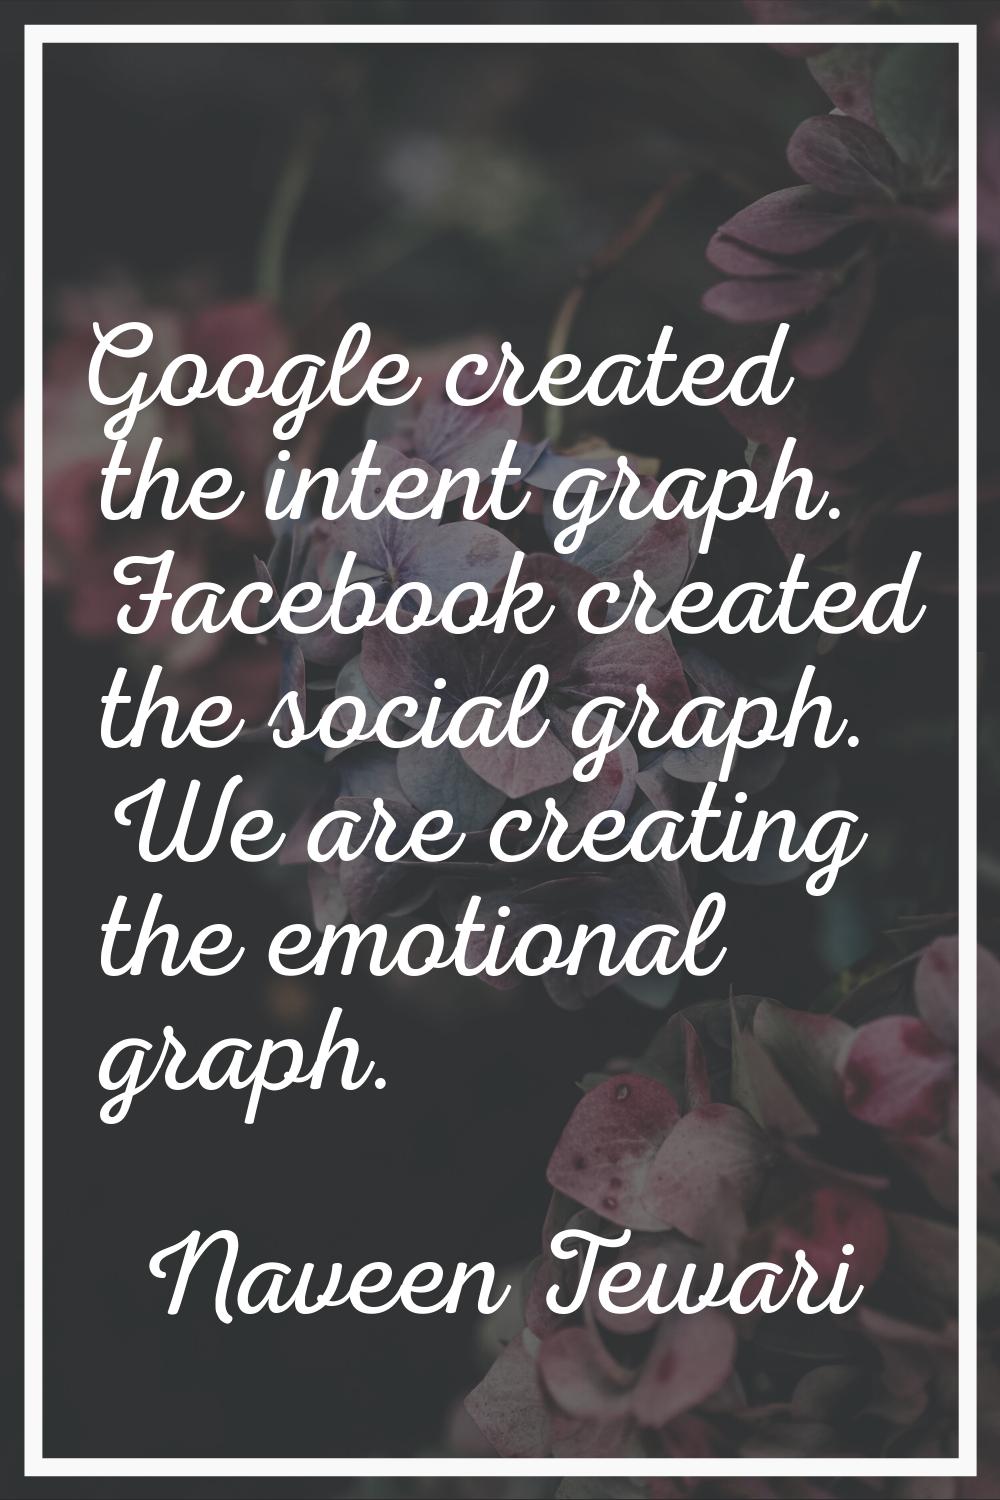 Google created the intent graph. Facebook created the social graph. We are creating the emotional g